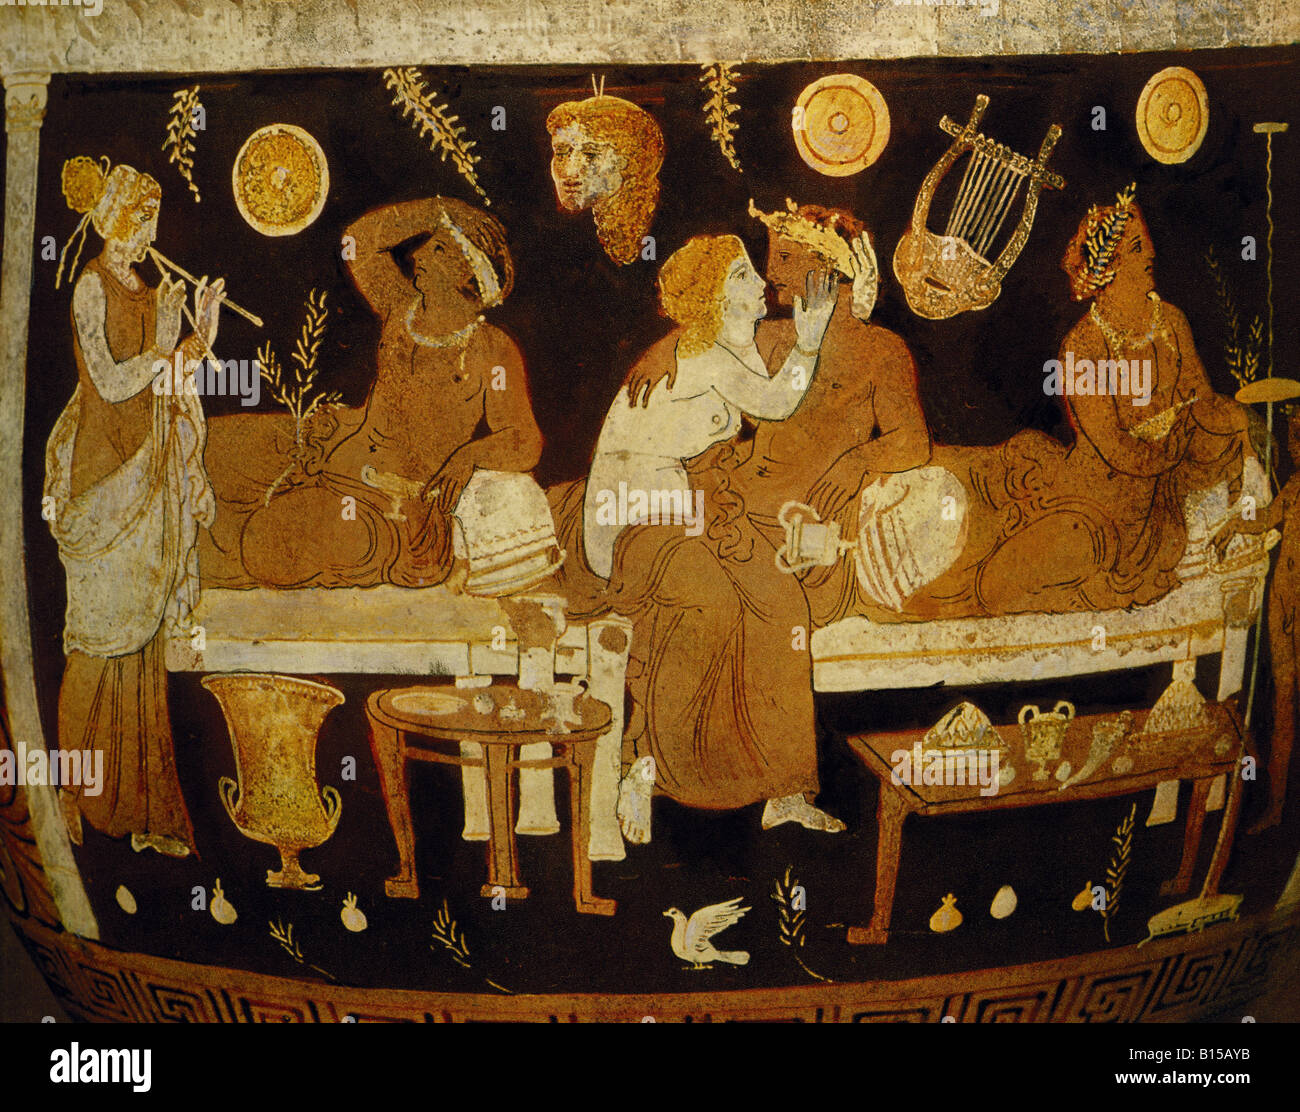 fine arts, ancient world, Campania, vase painting, banquet with flute player, hetaeras and juveniles, red-figured style, detail, krater, by the 'C.A. Painter', circa 340 B.C., Museo Nazionale, Naples, Artist's Copyright has not to be cleared Stock Photo